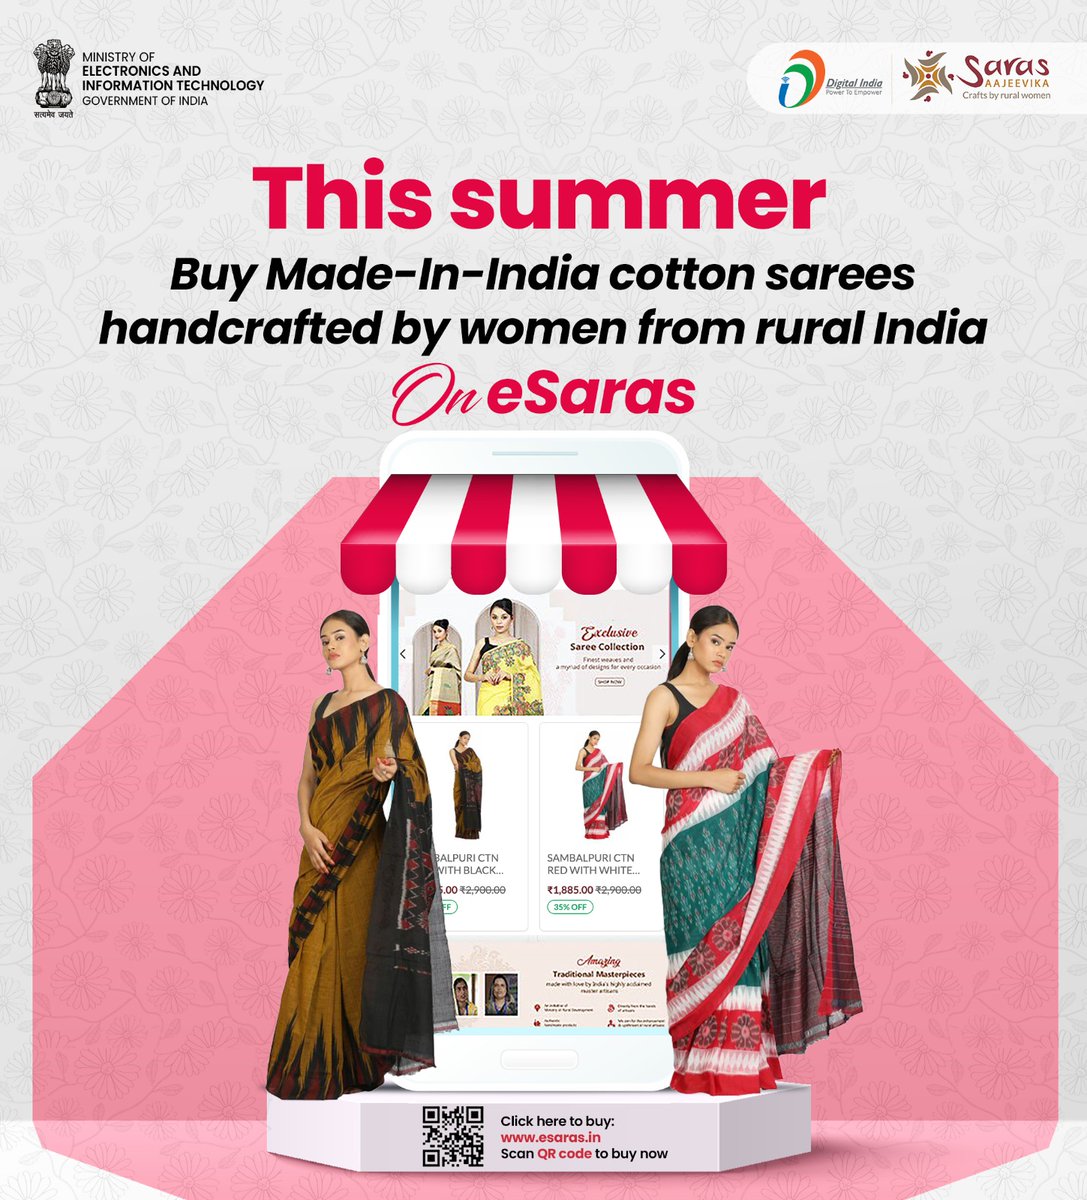 🥻 Shop the finest cotton sarees handcrafted by women from rural India for every occasion from the #eSaras portal (esaras.in). #DigitalIndia #esarasaajeevika @DigitalIndiaCrp @esarasaajeevika